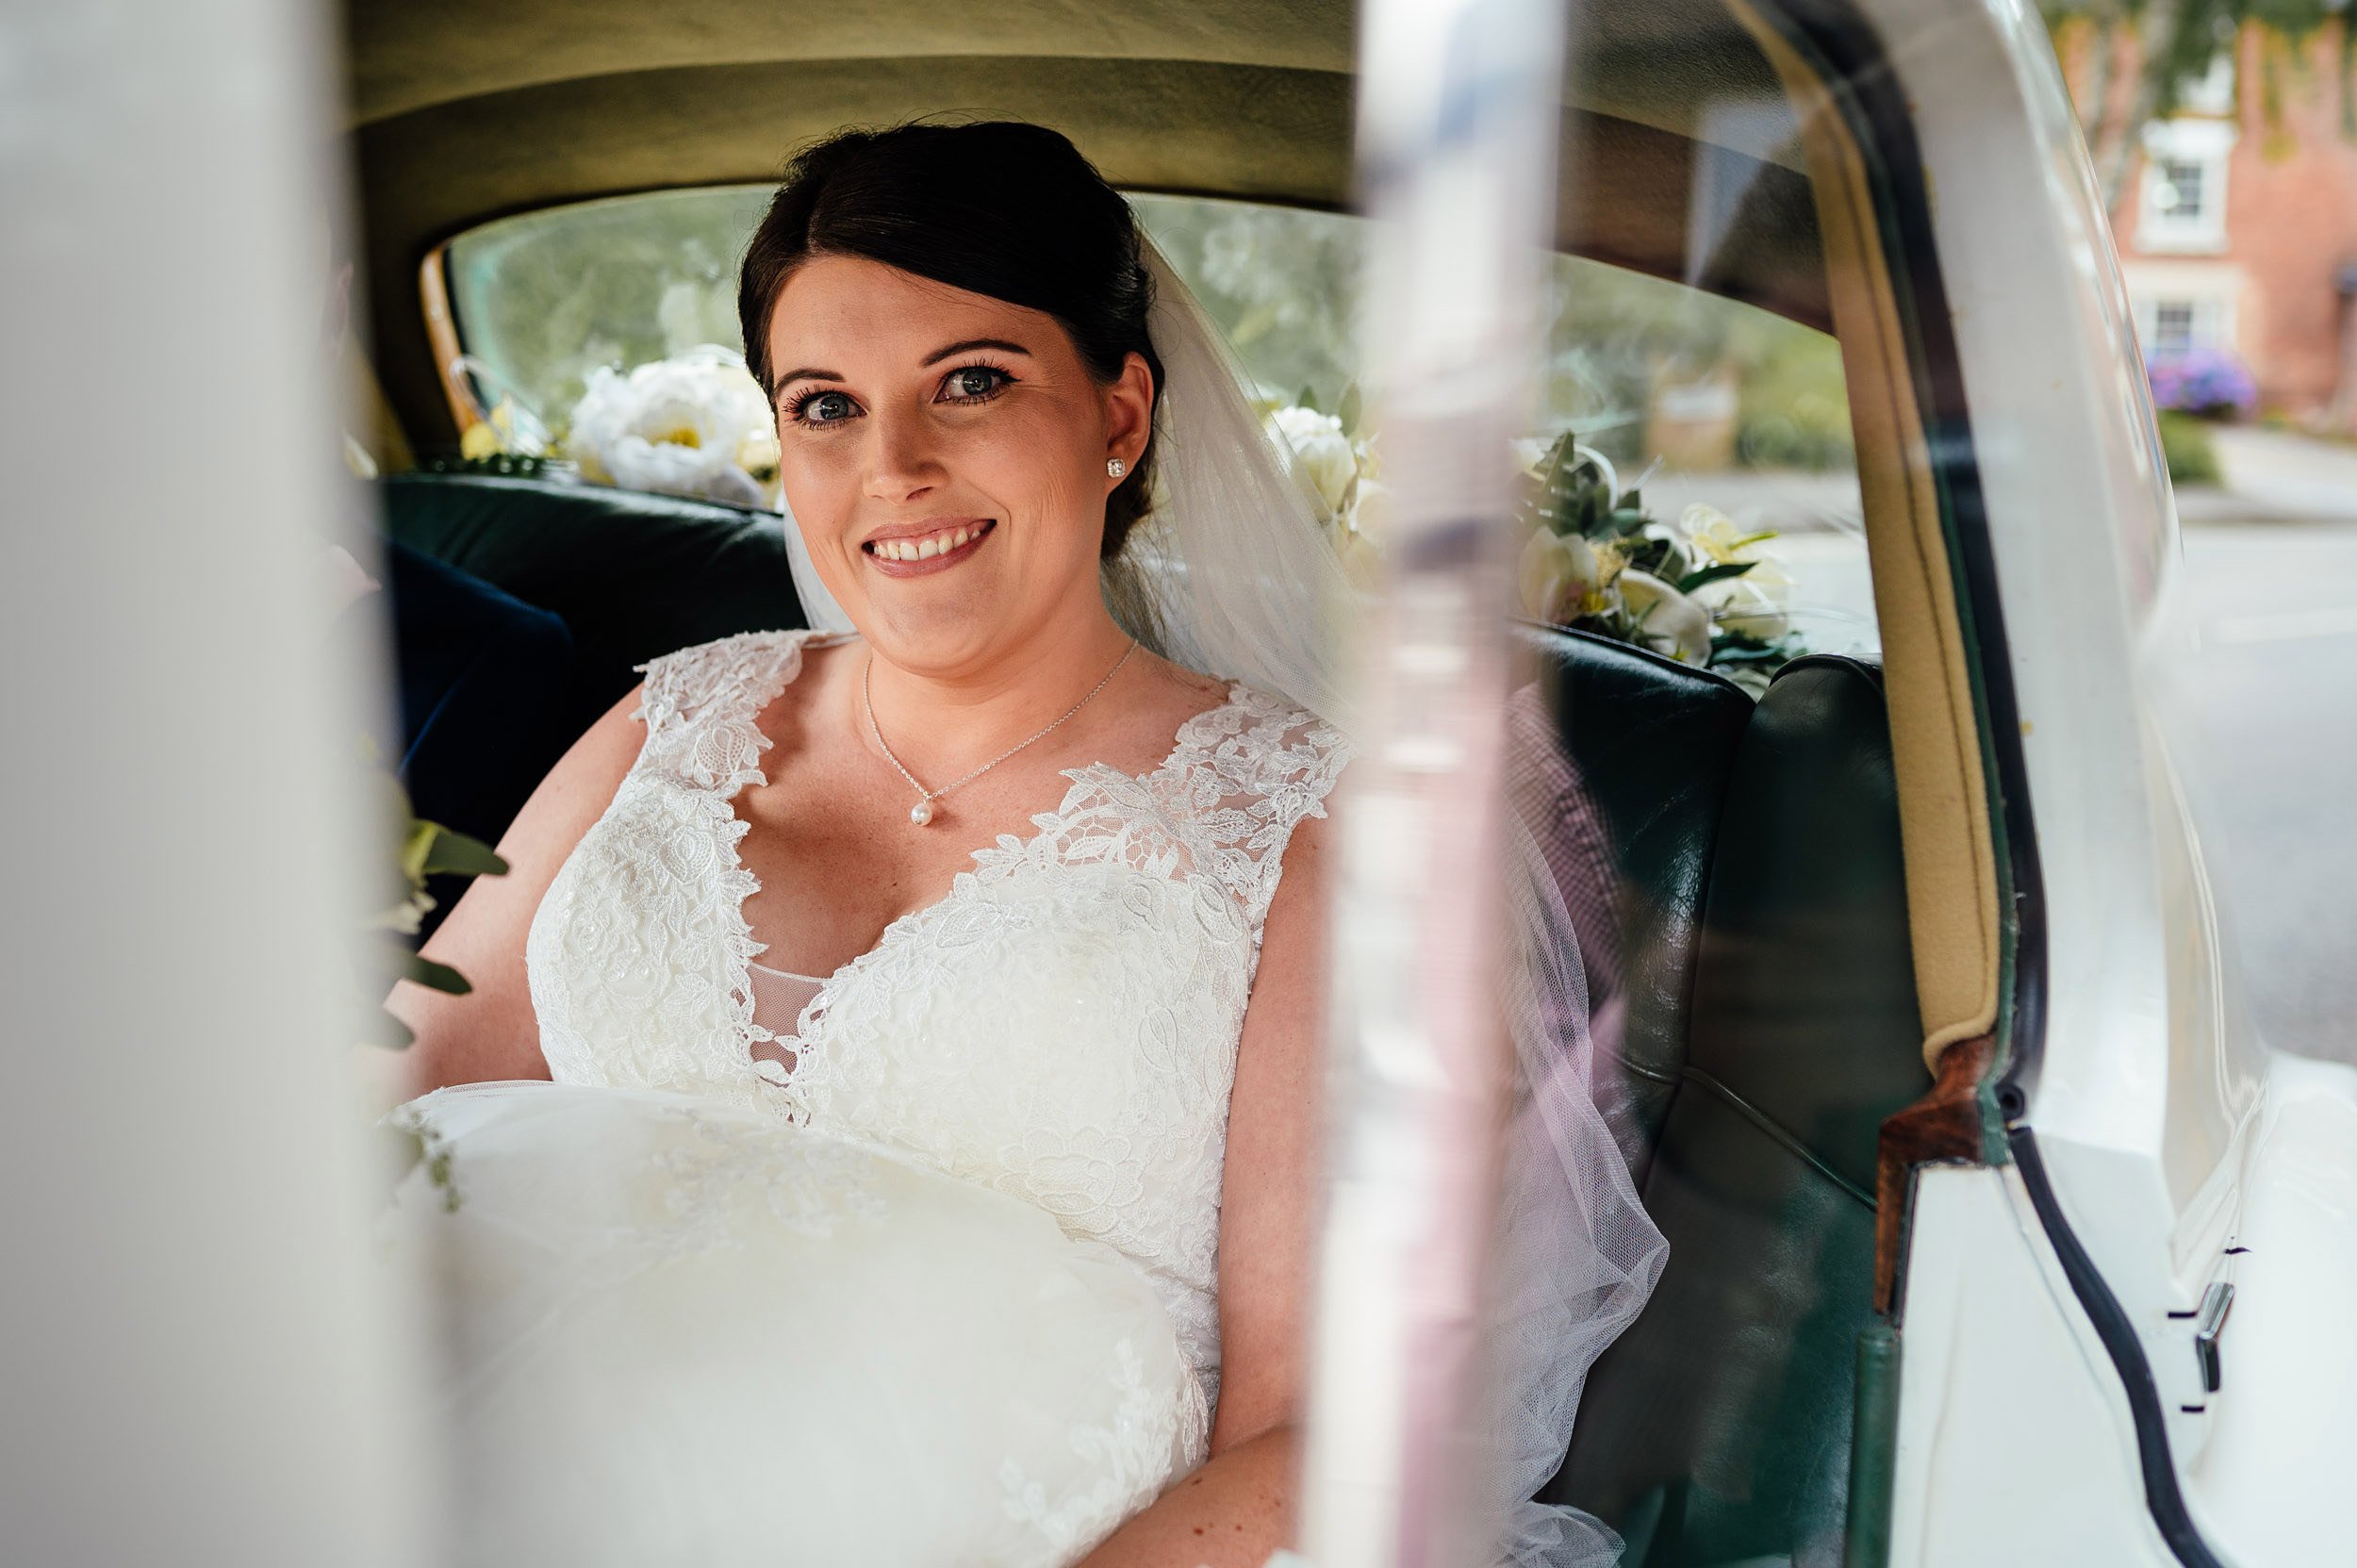 bride arrives at church in her wedding car